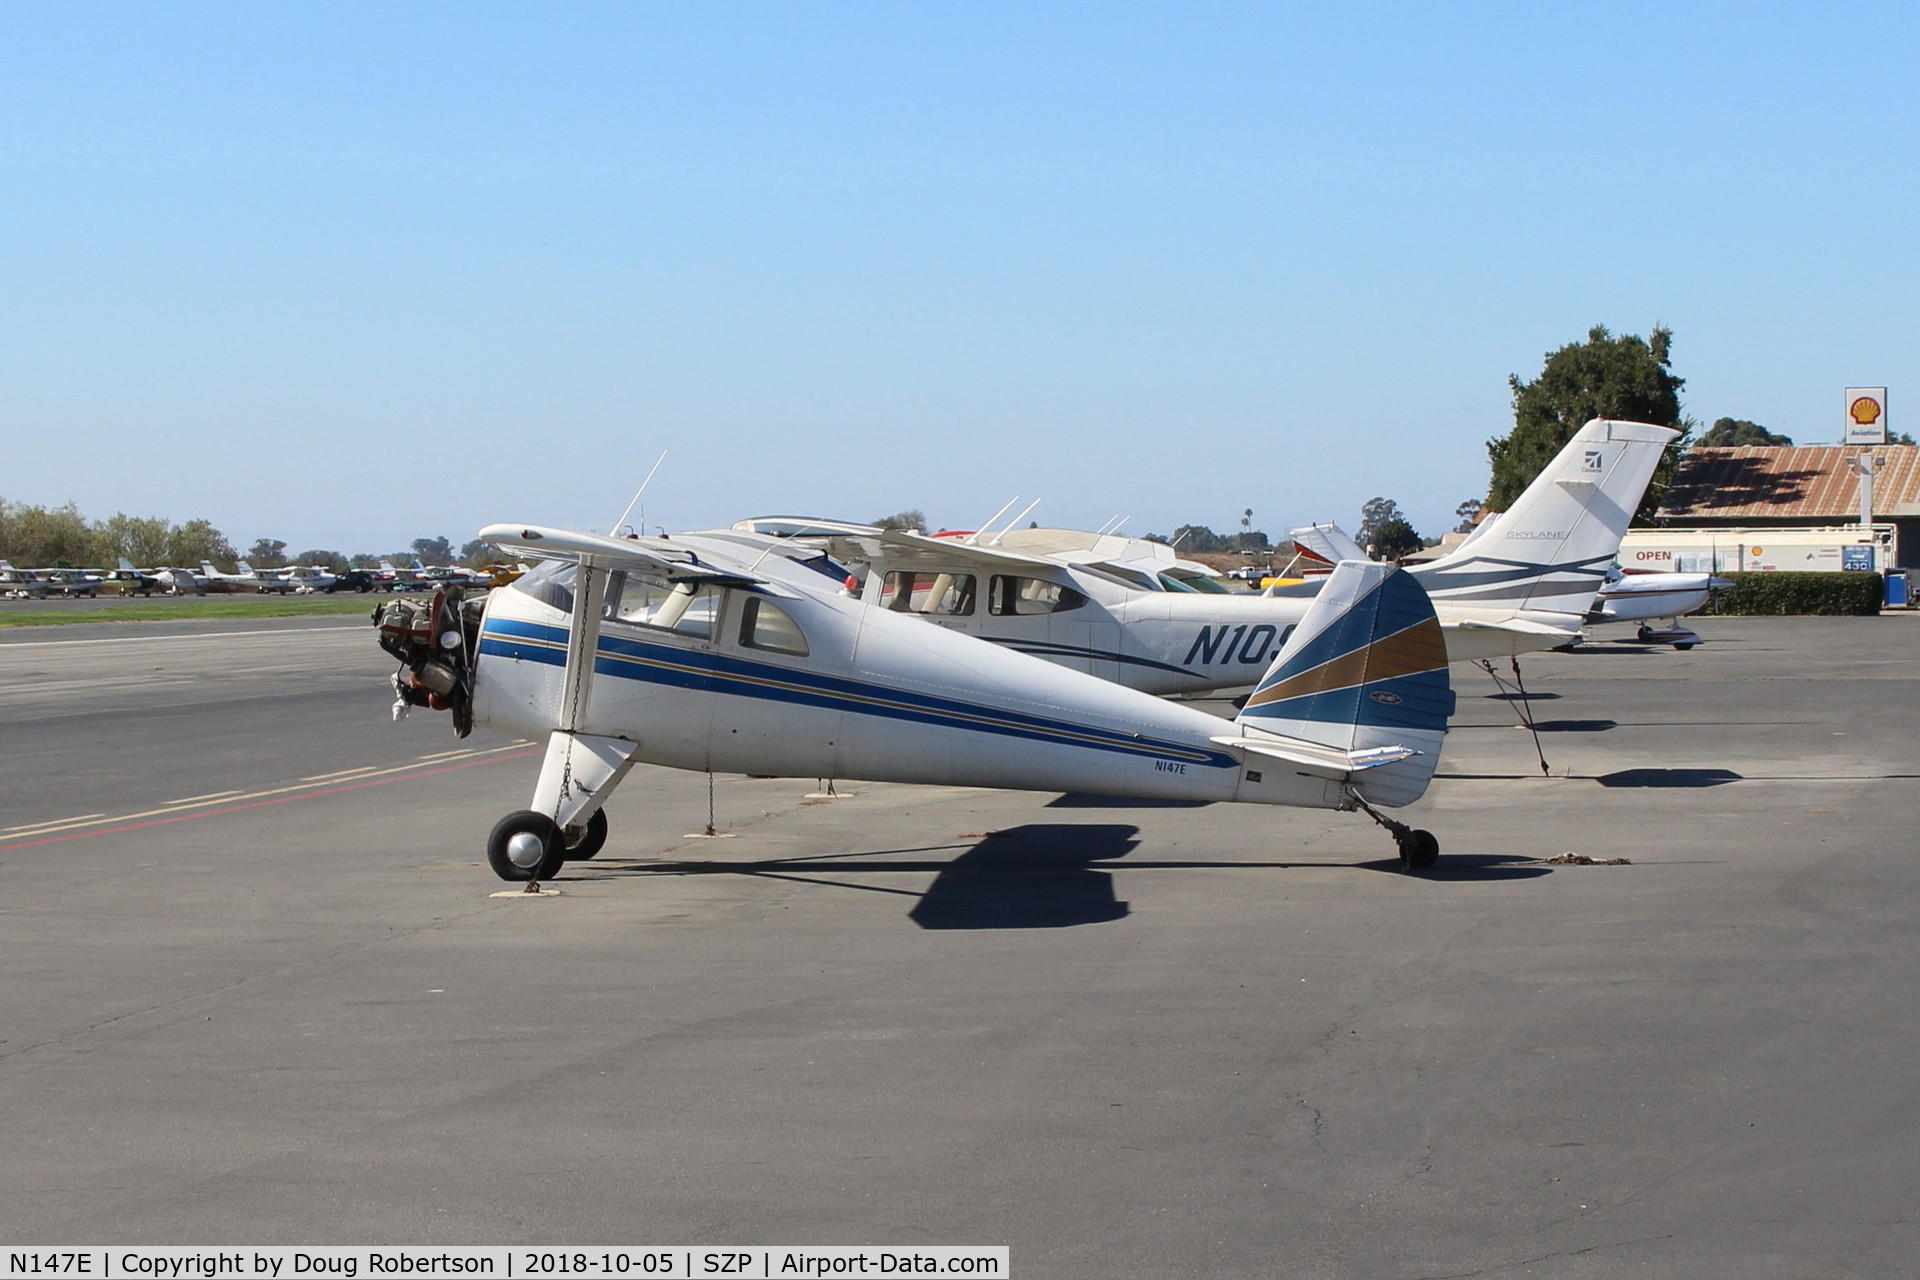 N147E, 1947 Luscombe 8E Silvaire C/N 5256, 1947 Luscombe 8E SILVAIRE, Continental C85 85 Hp, cowl and prop off. Originally, this aircraft was all polished shiny aluminum-not painted